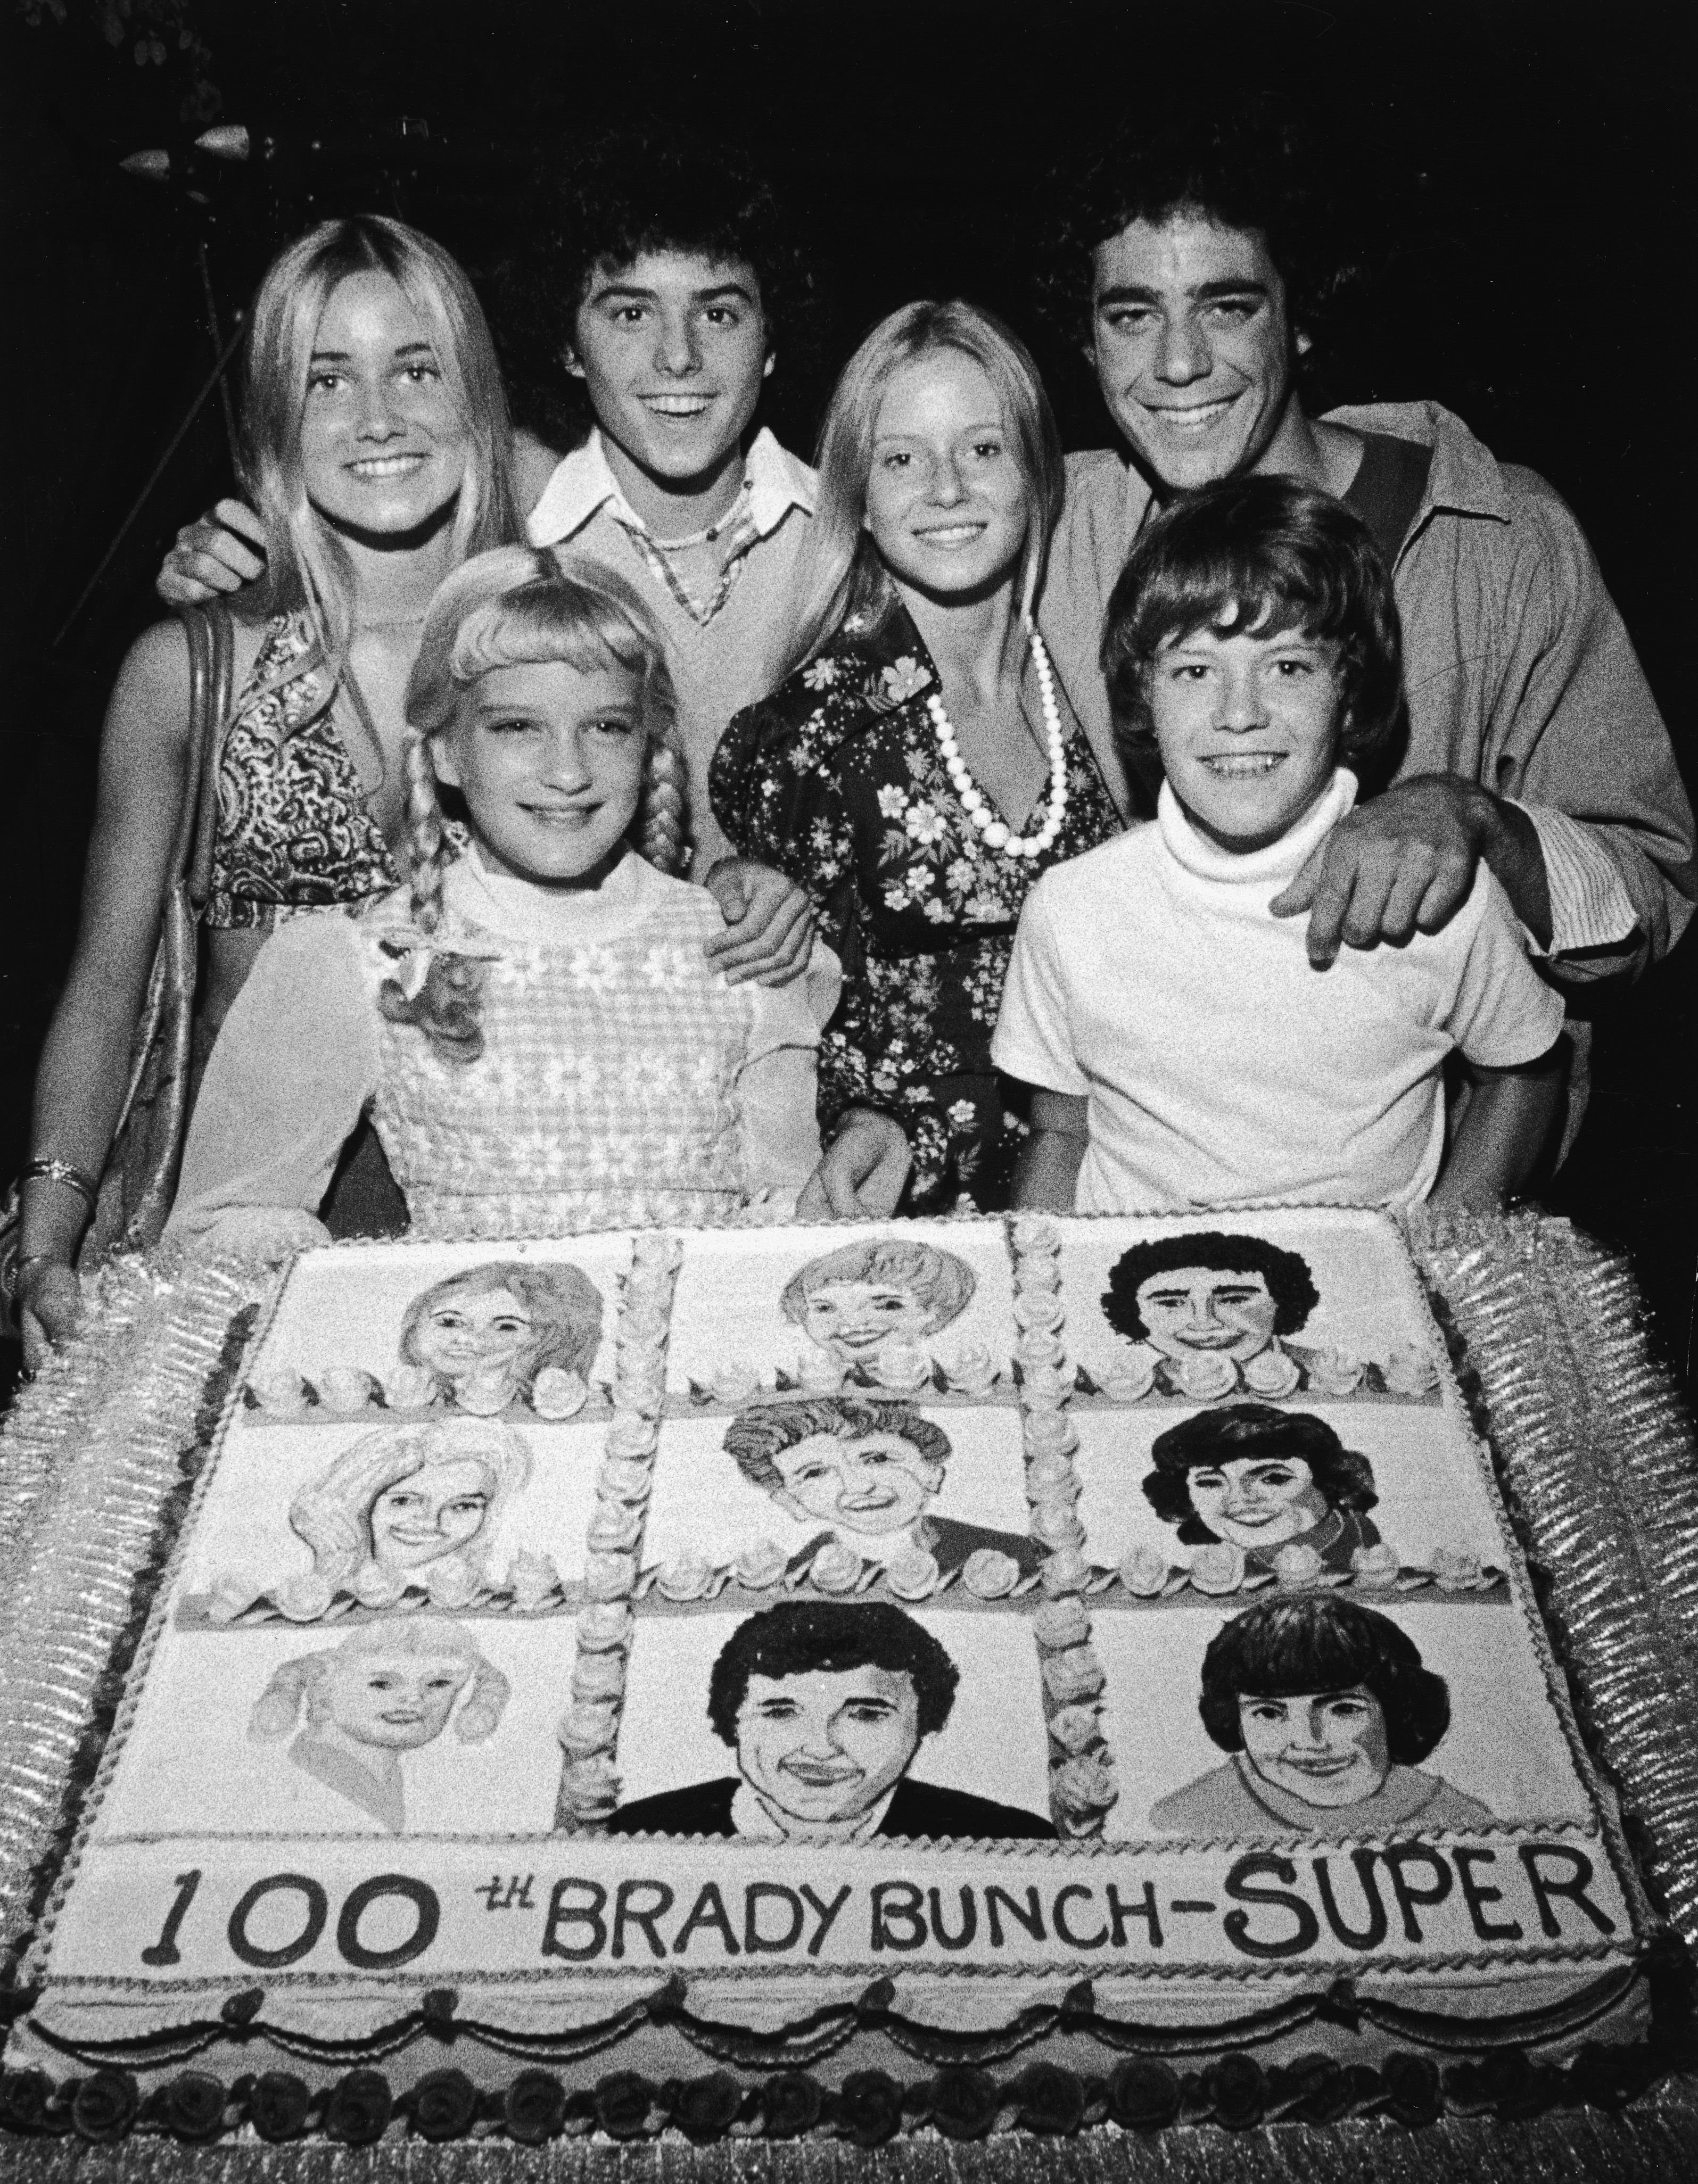 Eve Plumb and the cast of the 1970s sitcom "The Brady Bunch" | Source: Getty Images